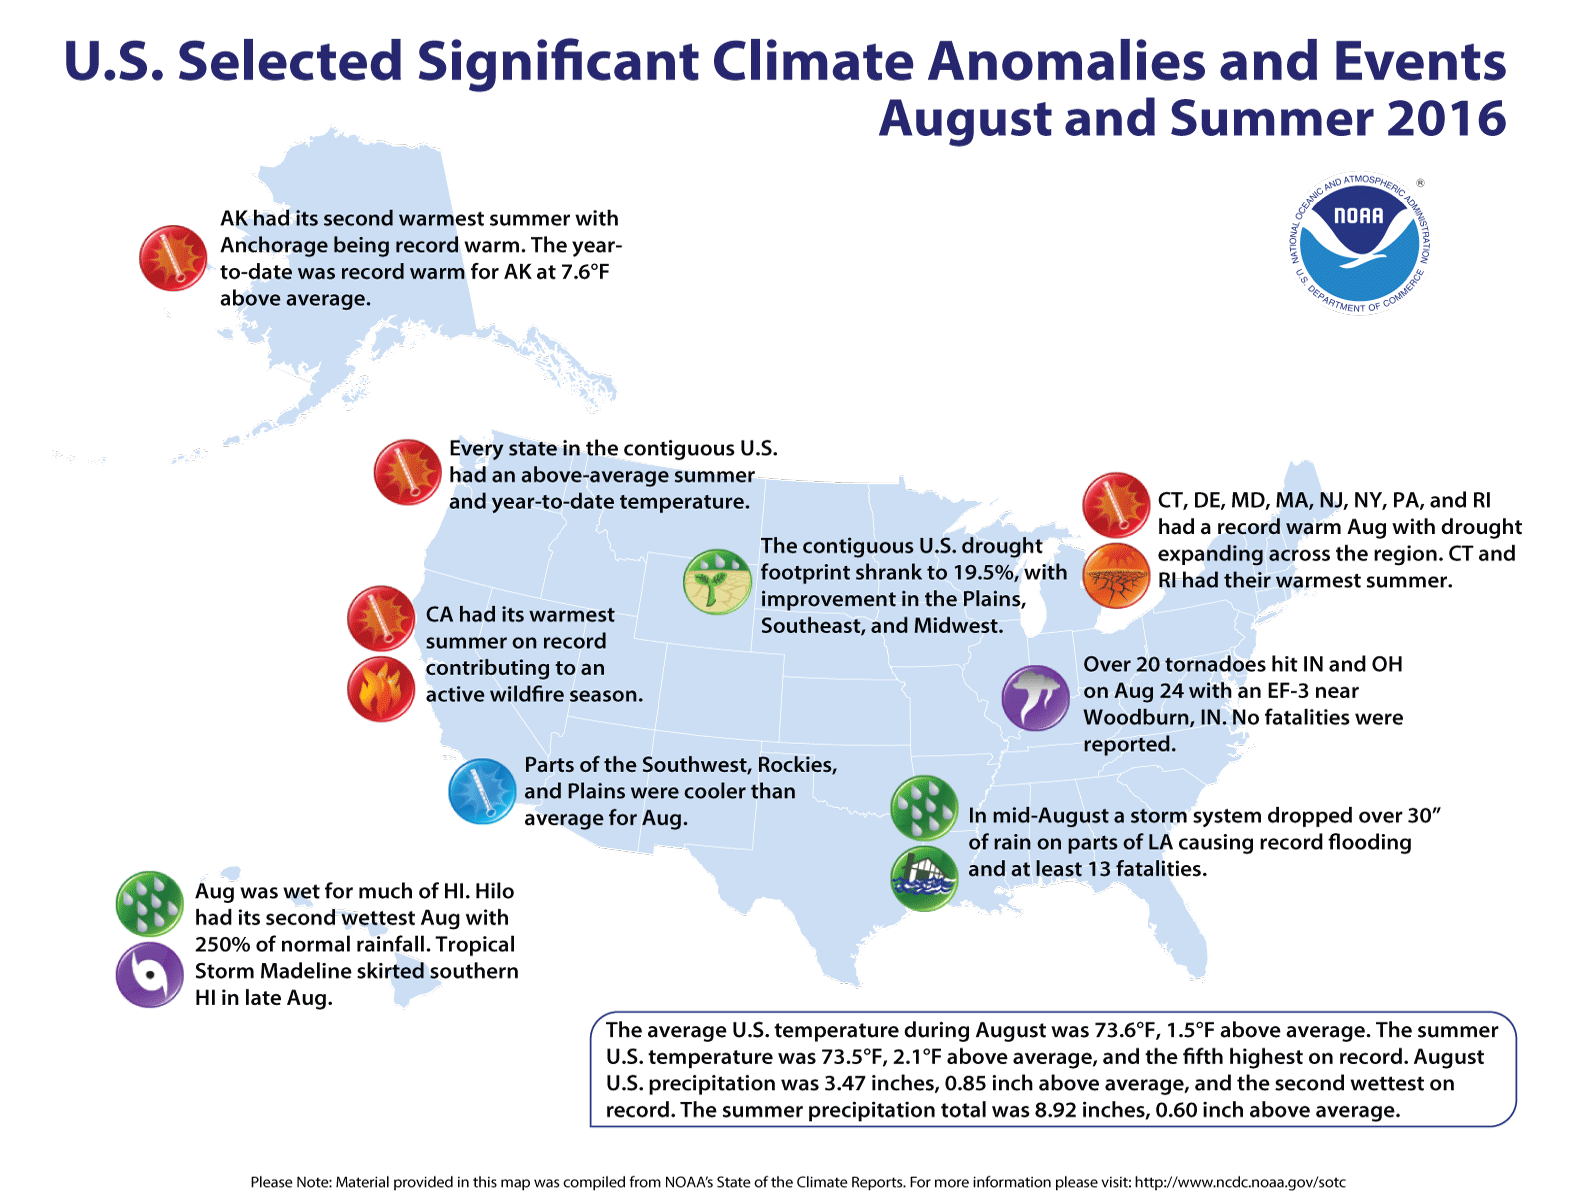 A map of significant climate events that occurred across the U.S. during the month of August and Summer 2016.